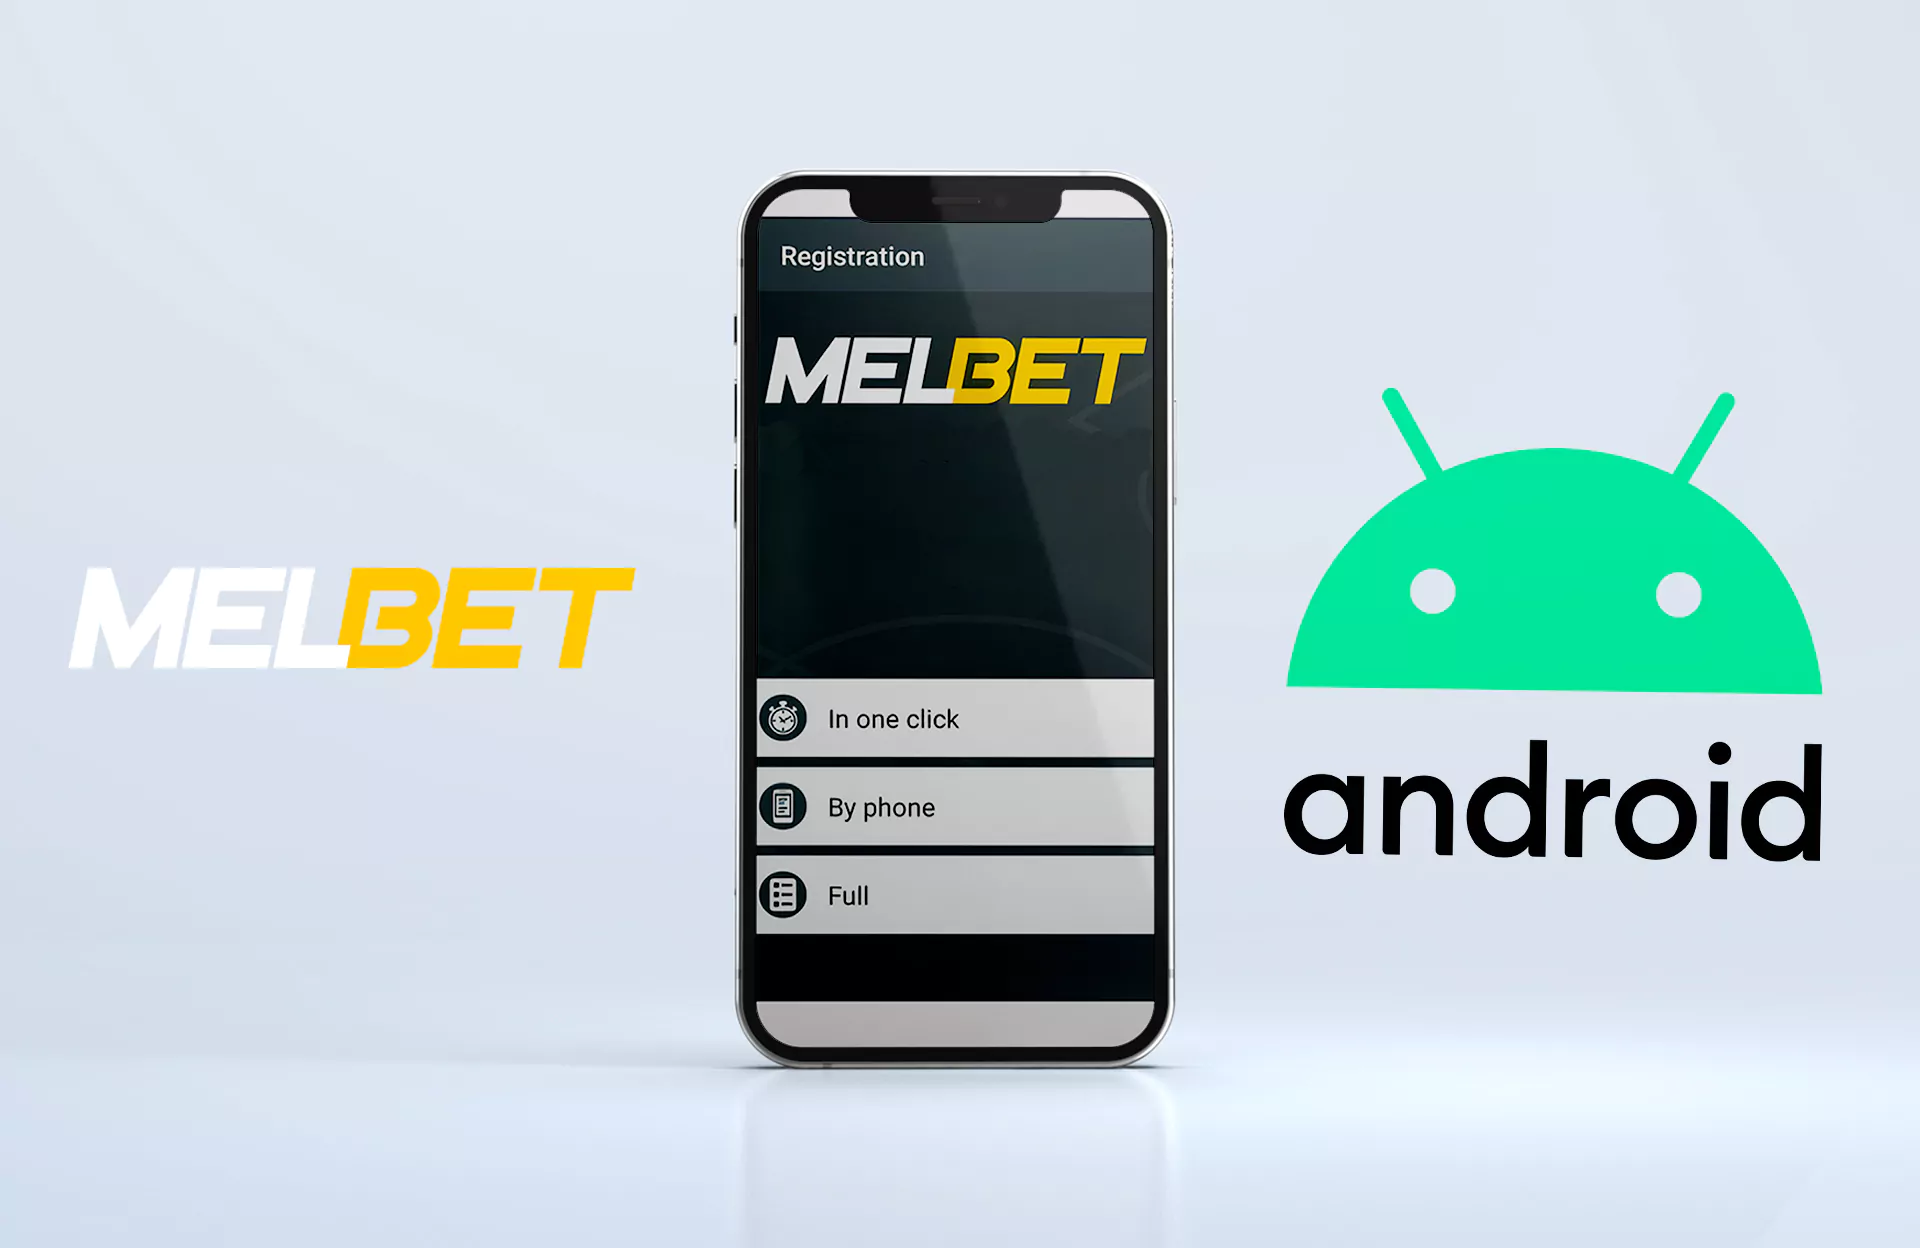 Install the app, run it and create an account at Melbet, or log in if you have already had it.